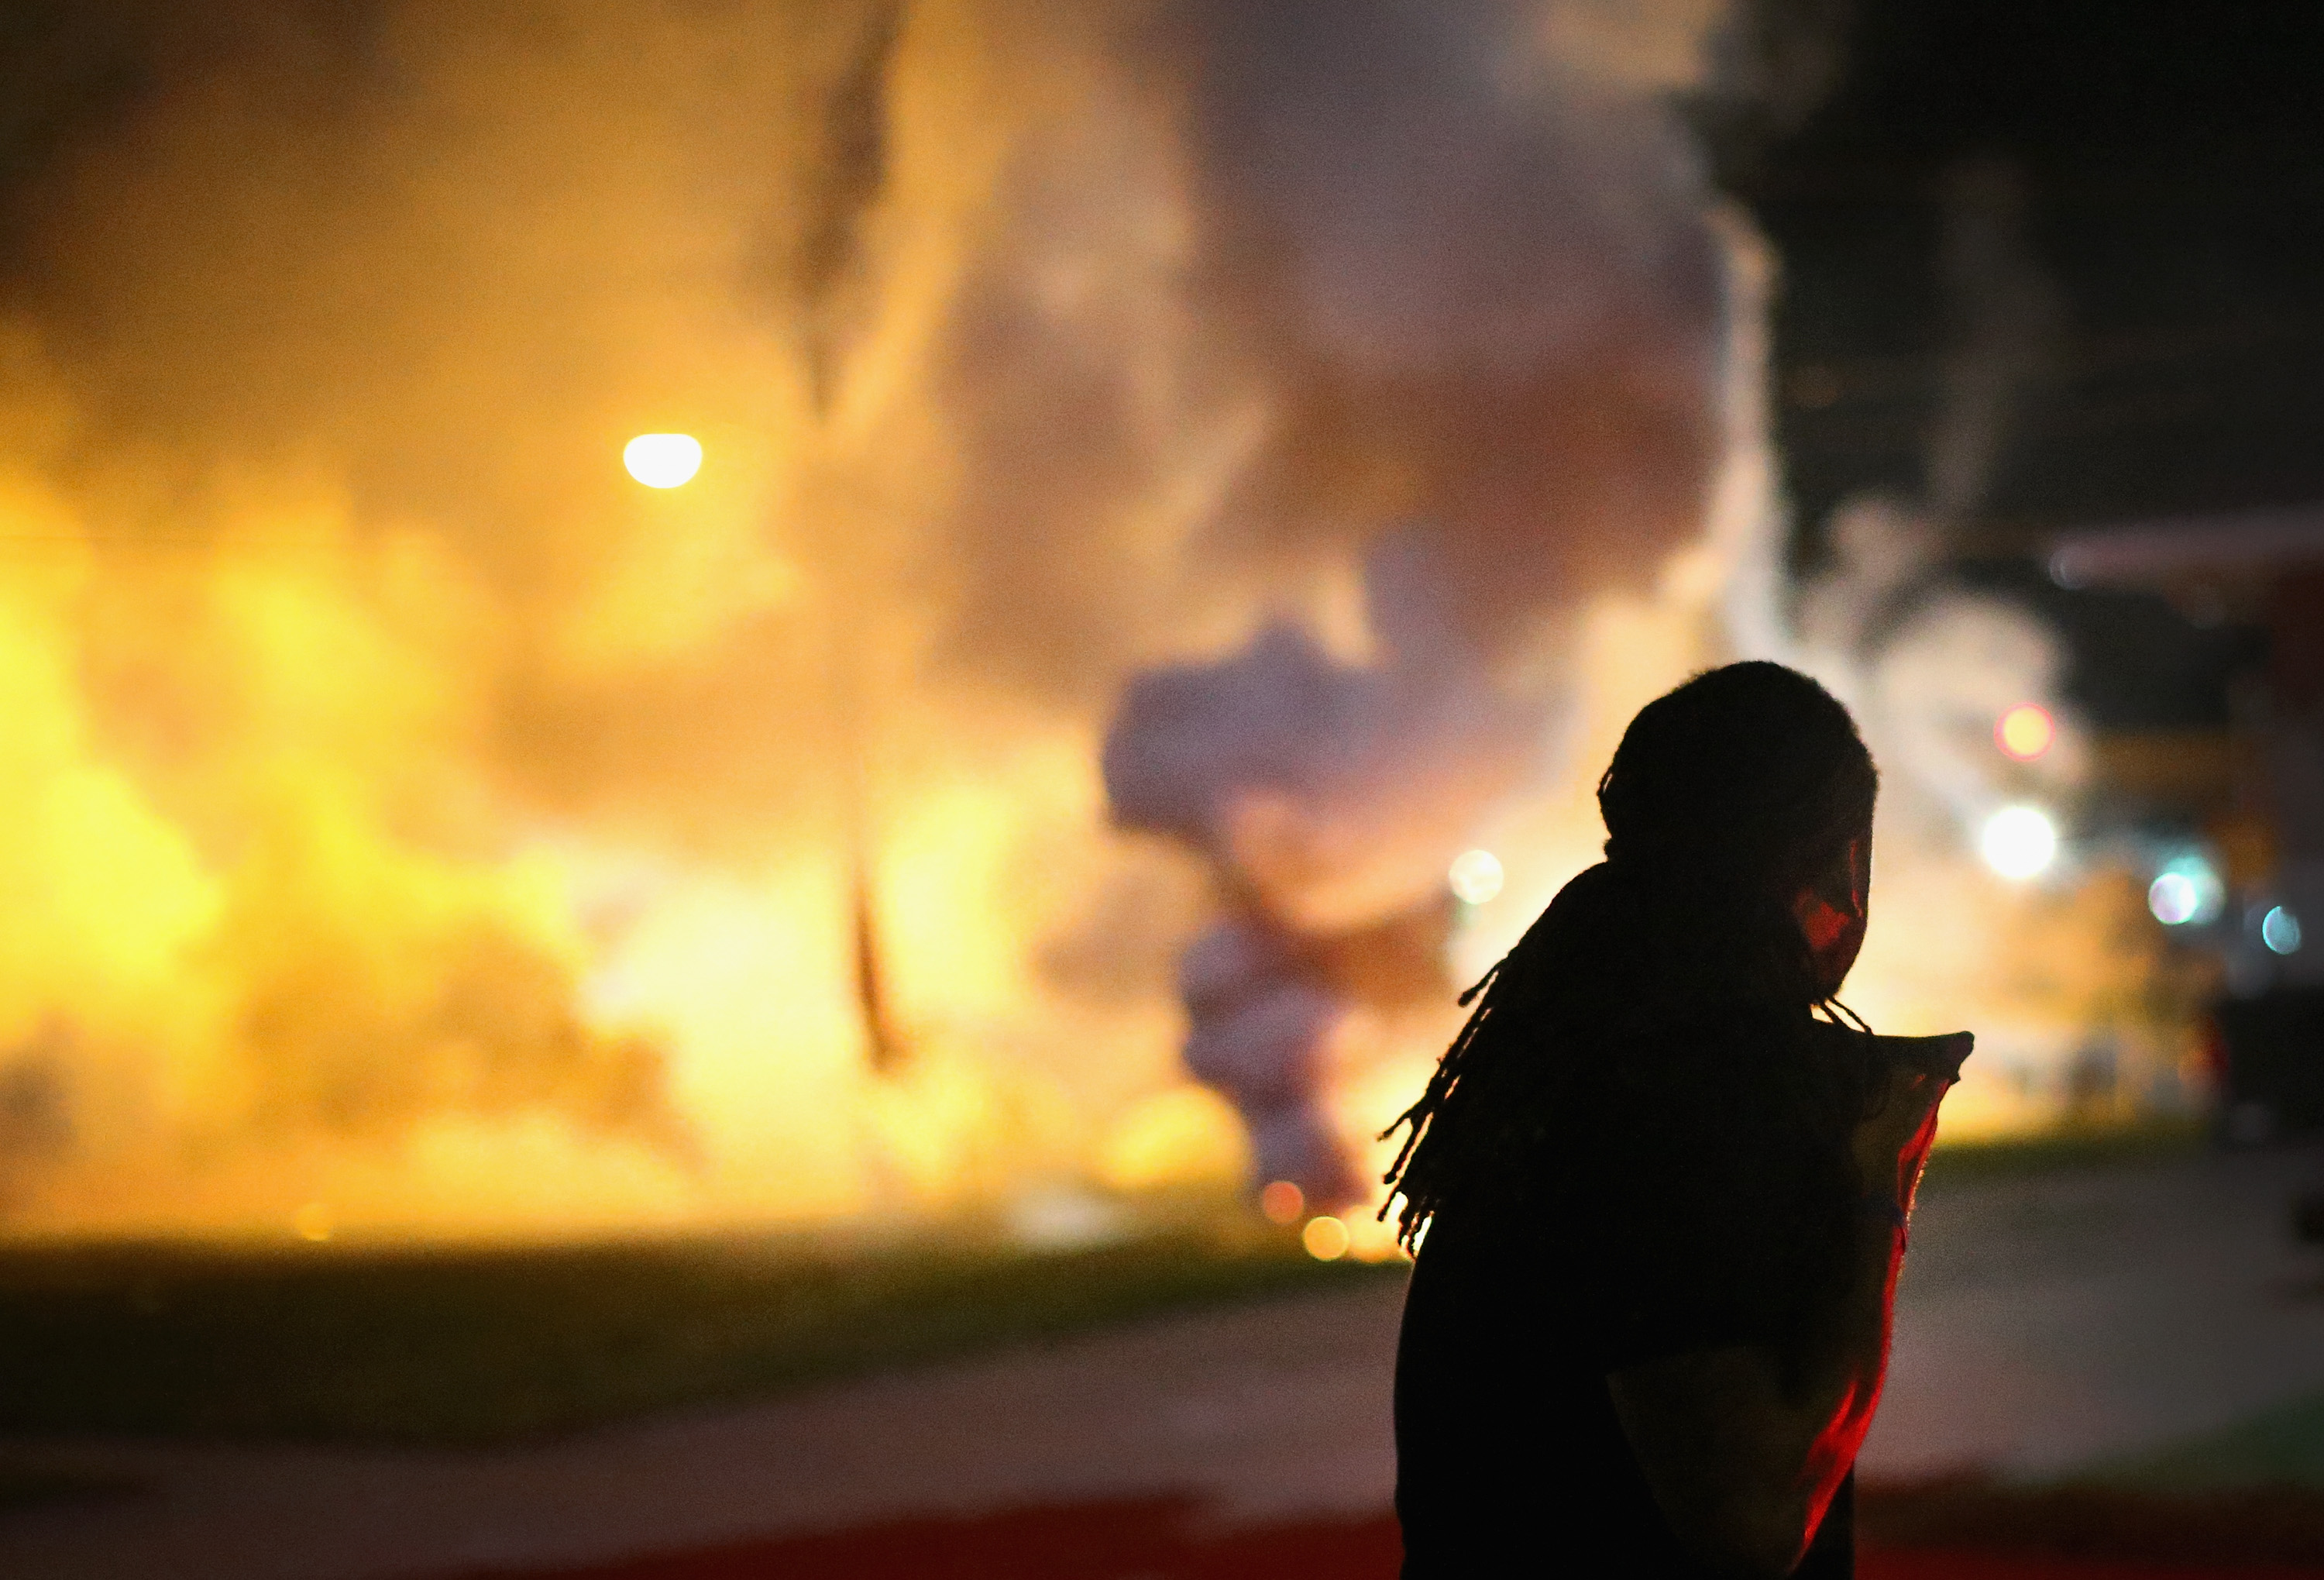 A demonstrator, protesting the shooting death of teenager Michael Brown, scrambles for cover as police fire tear gas on August 13, 2014 in Ferguson, Missouri. (Scott Olson&mdash;Getty Images)